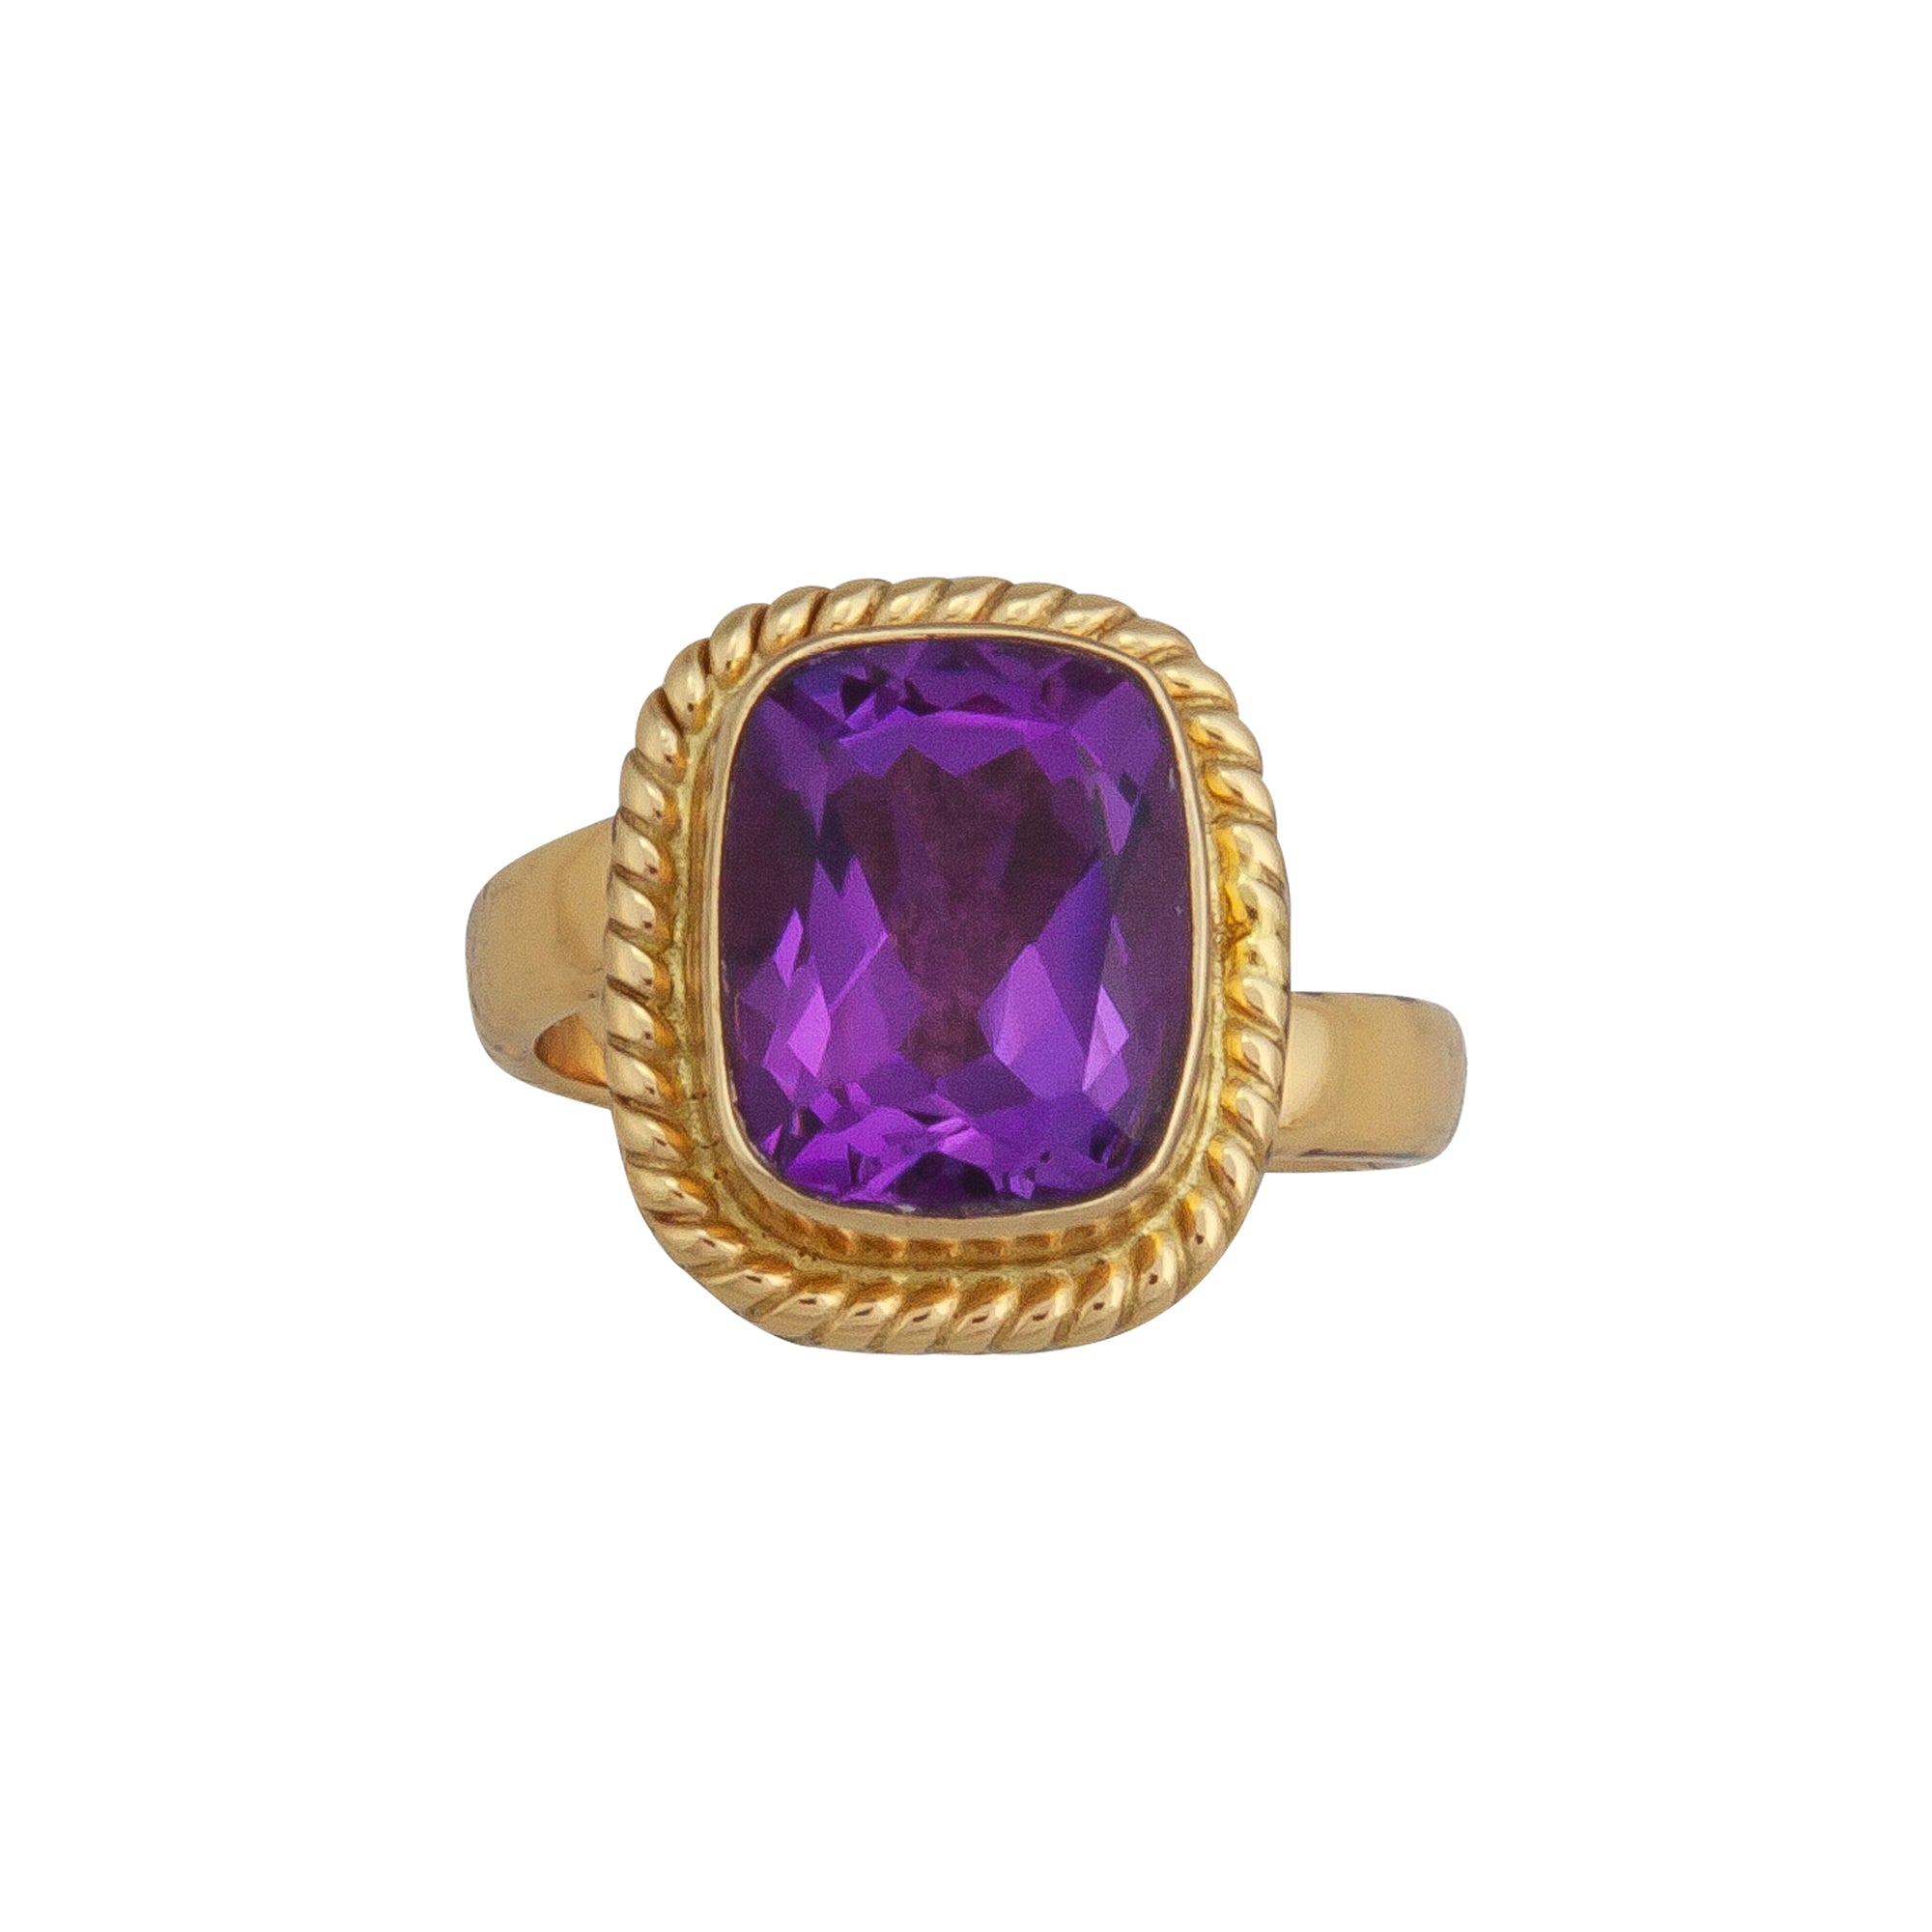 Charles Albert Jewelry - Alchemia Amethyst Adjustable Rope Ring - Front View